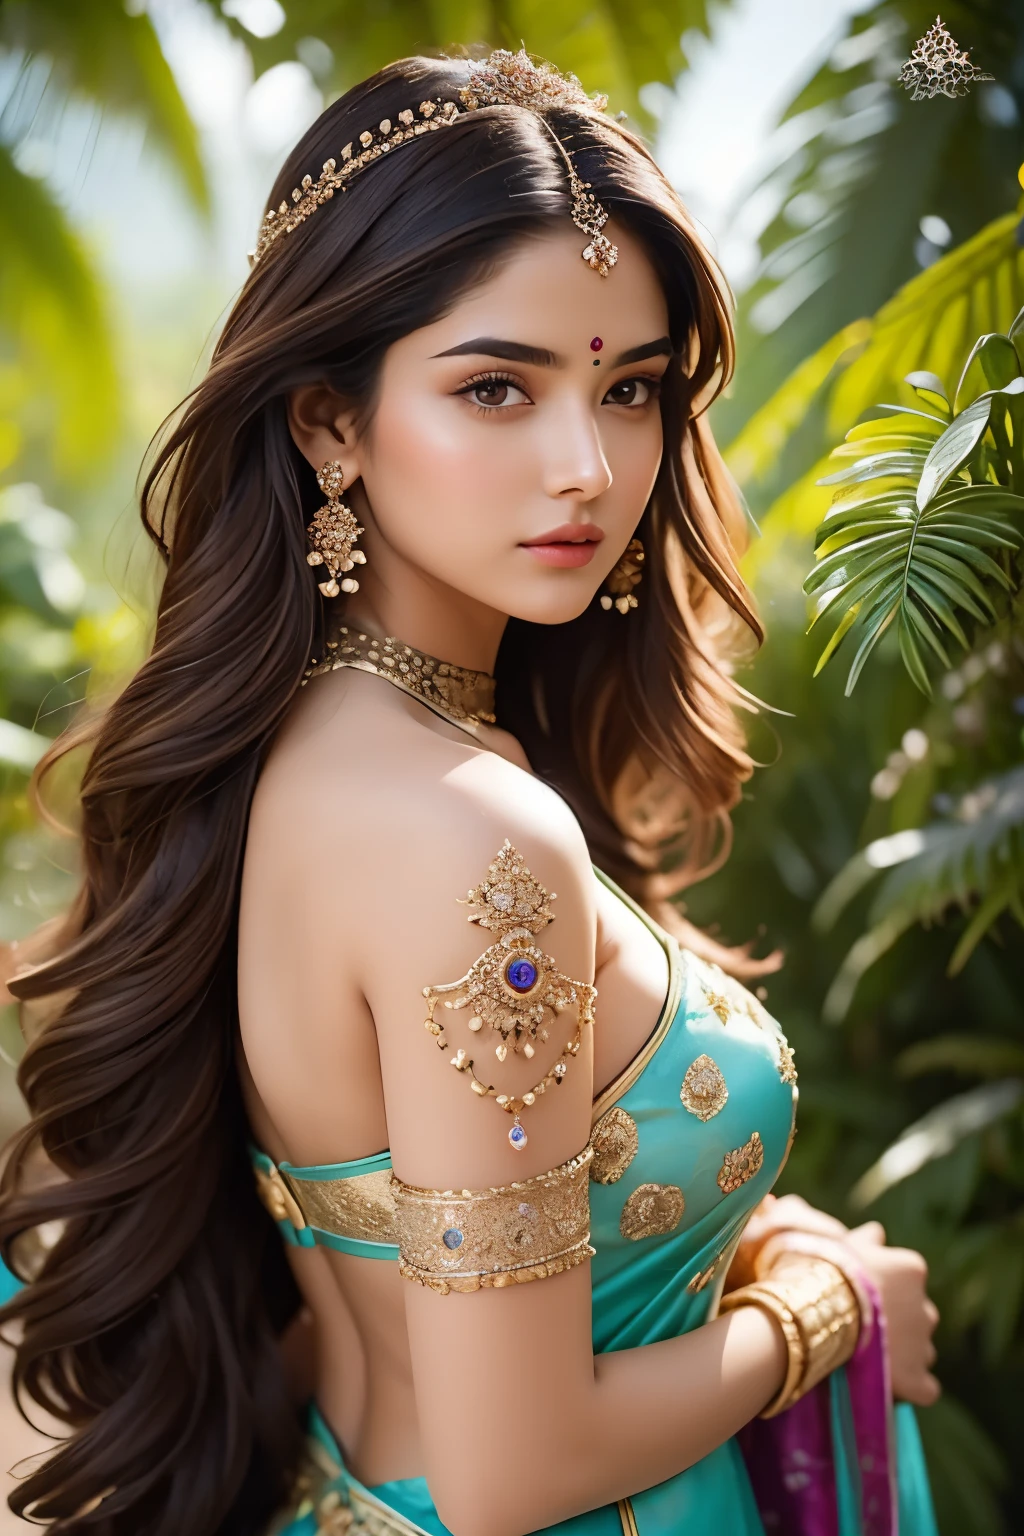 An ethereal Indian princess with an otherworldly beauty that is both captivating and enigmatic. Her features are delicately alien, with large, mesmerizing eyes that seem to glow with an inner light. The iridescent skin shimmers in hues of sapphire and amethyst, reflecting the vibrant colors of her intricately patterned clothing. The princess stands regally, her posture exuding gentle elegance and an air of royal dignity. Her long, flowing hair cascades down her back like a waterfall of black silk, adorned with precious gemstones that catch the light and add to the image's dazzling display. The background is a lush, tropical paradise, filled with exotic flora and fauna that seem to spring forth from the canvas itself. The princess's crown, ornate and intricate, rests gracefully upon her head, completing the stunning portrait that blends fantasy and science fiction into a richly imaginative world.